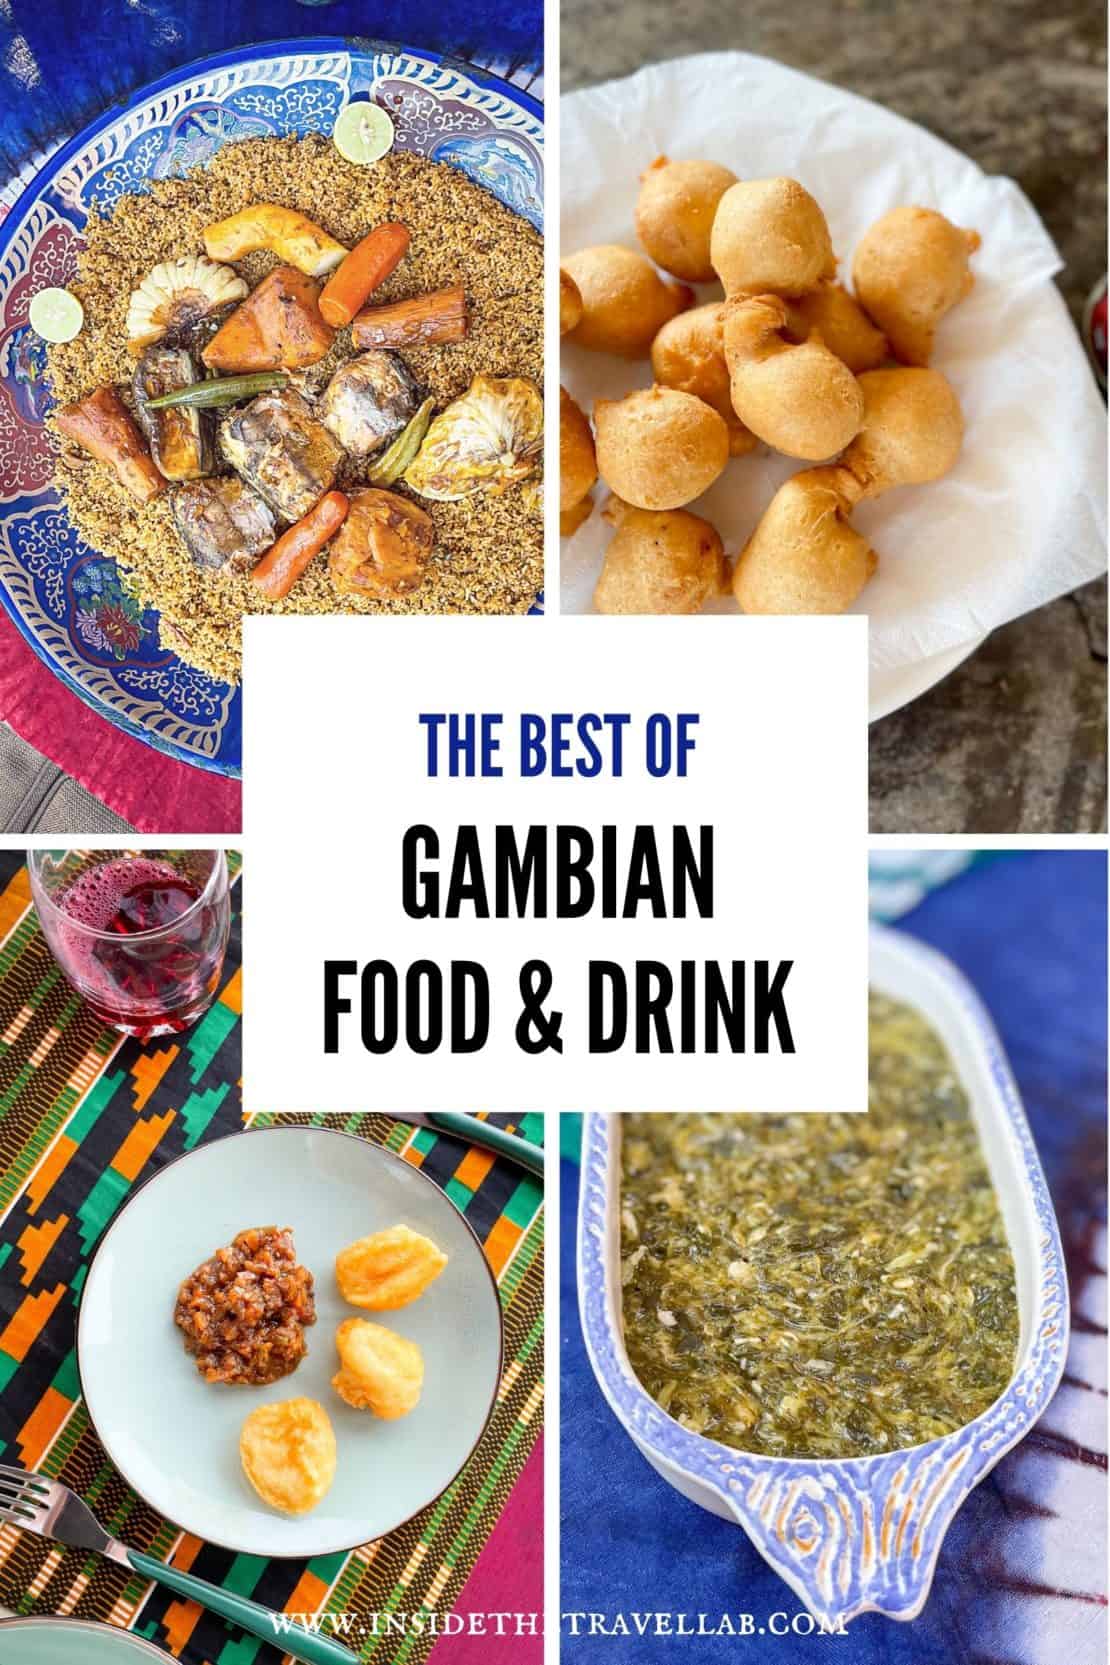 Cover image collage of food and drink from the Gambia for the article on Gambian cuisine